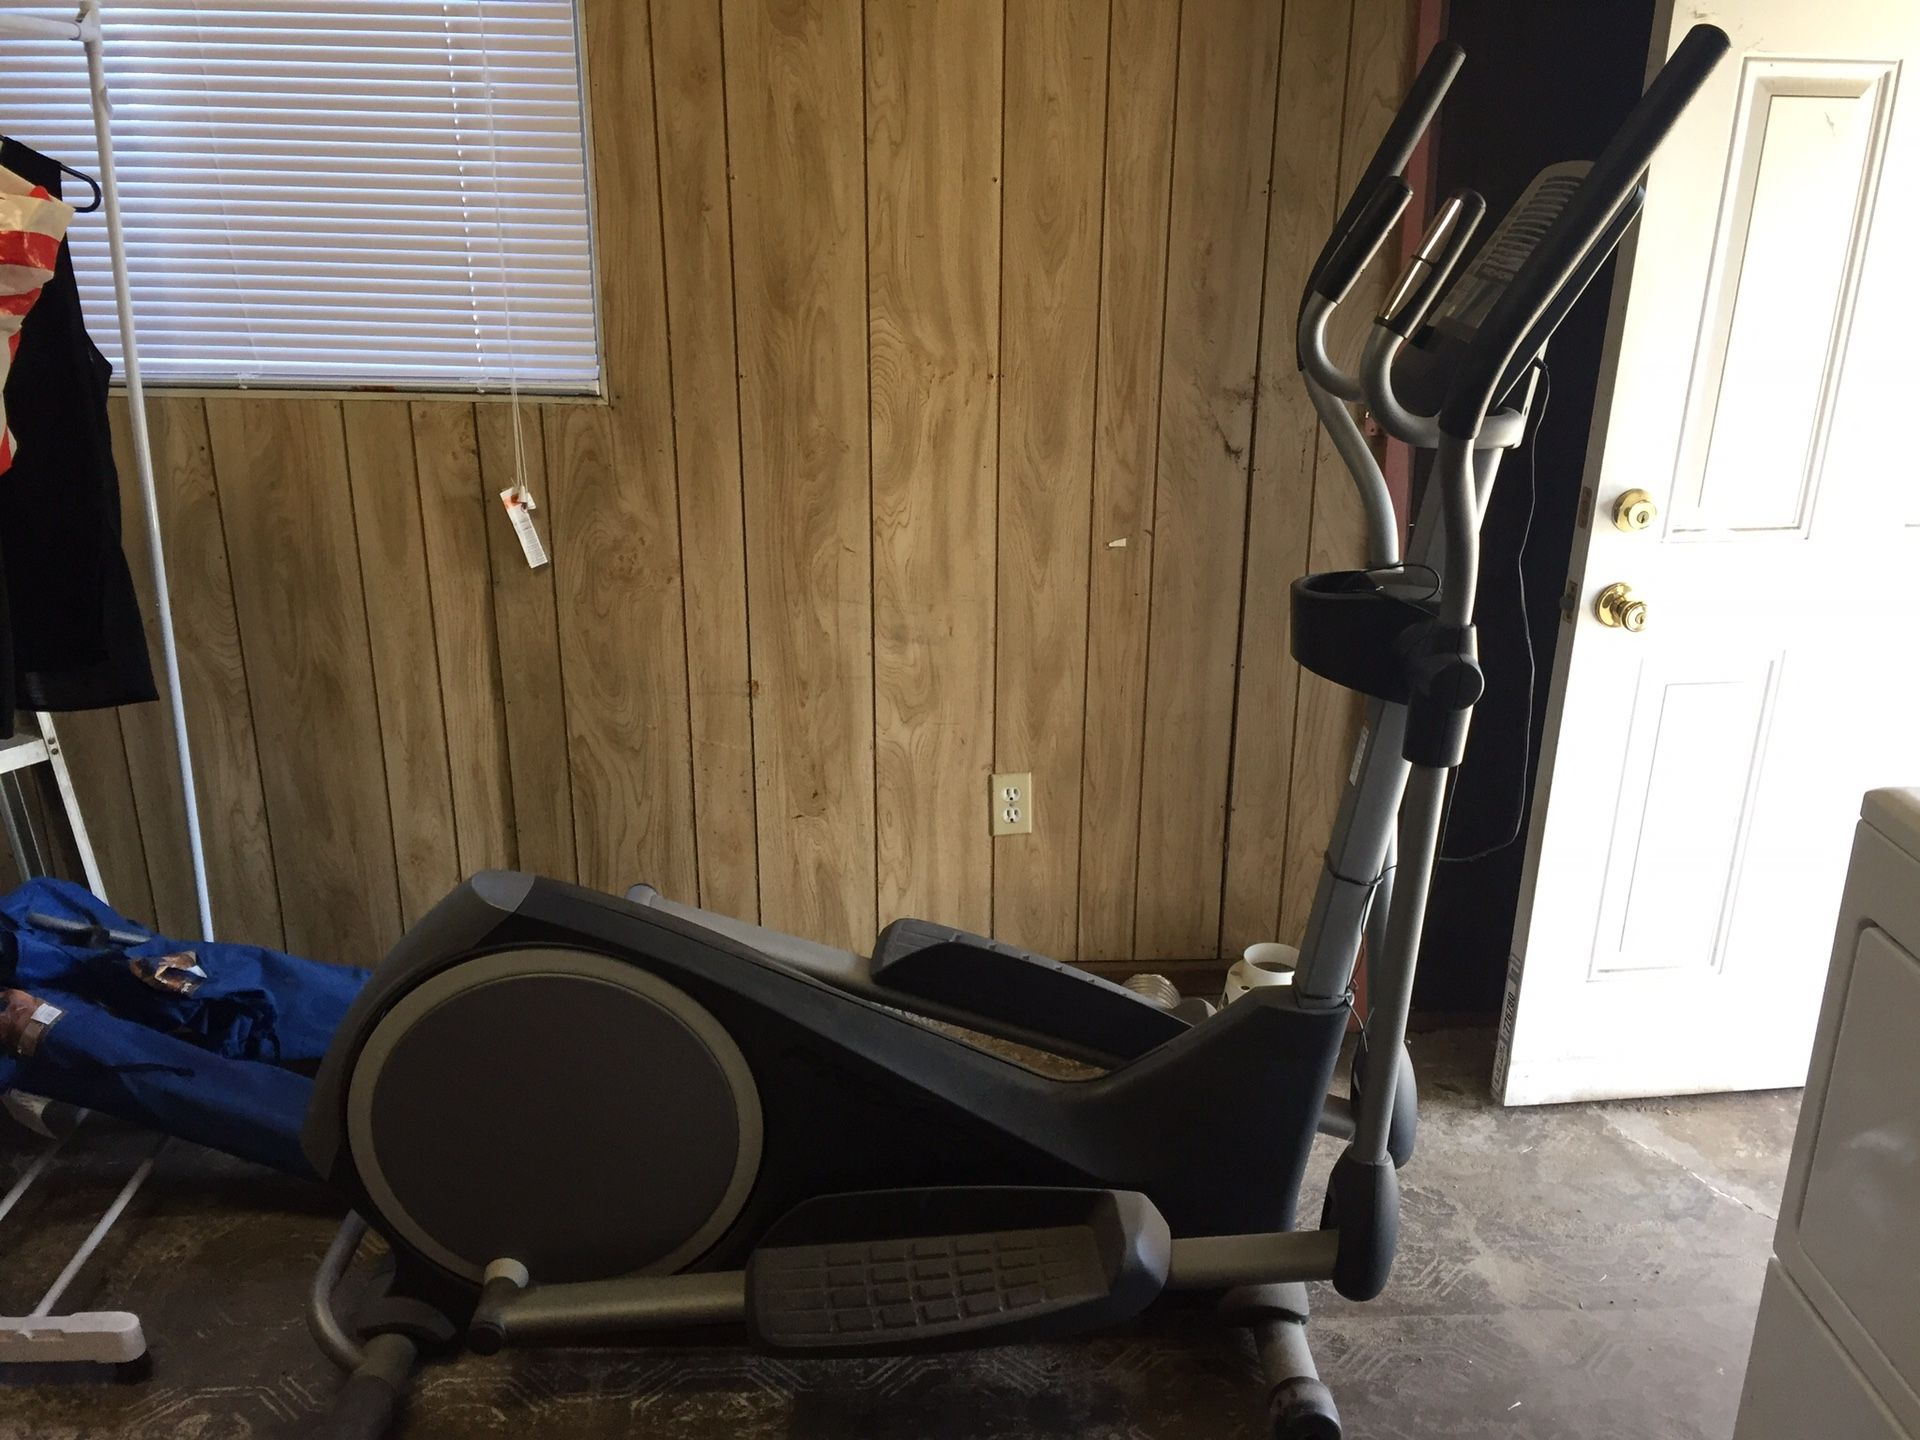 Elliptical, used less than 5 times.